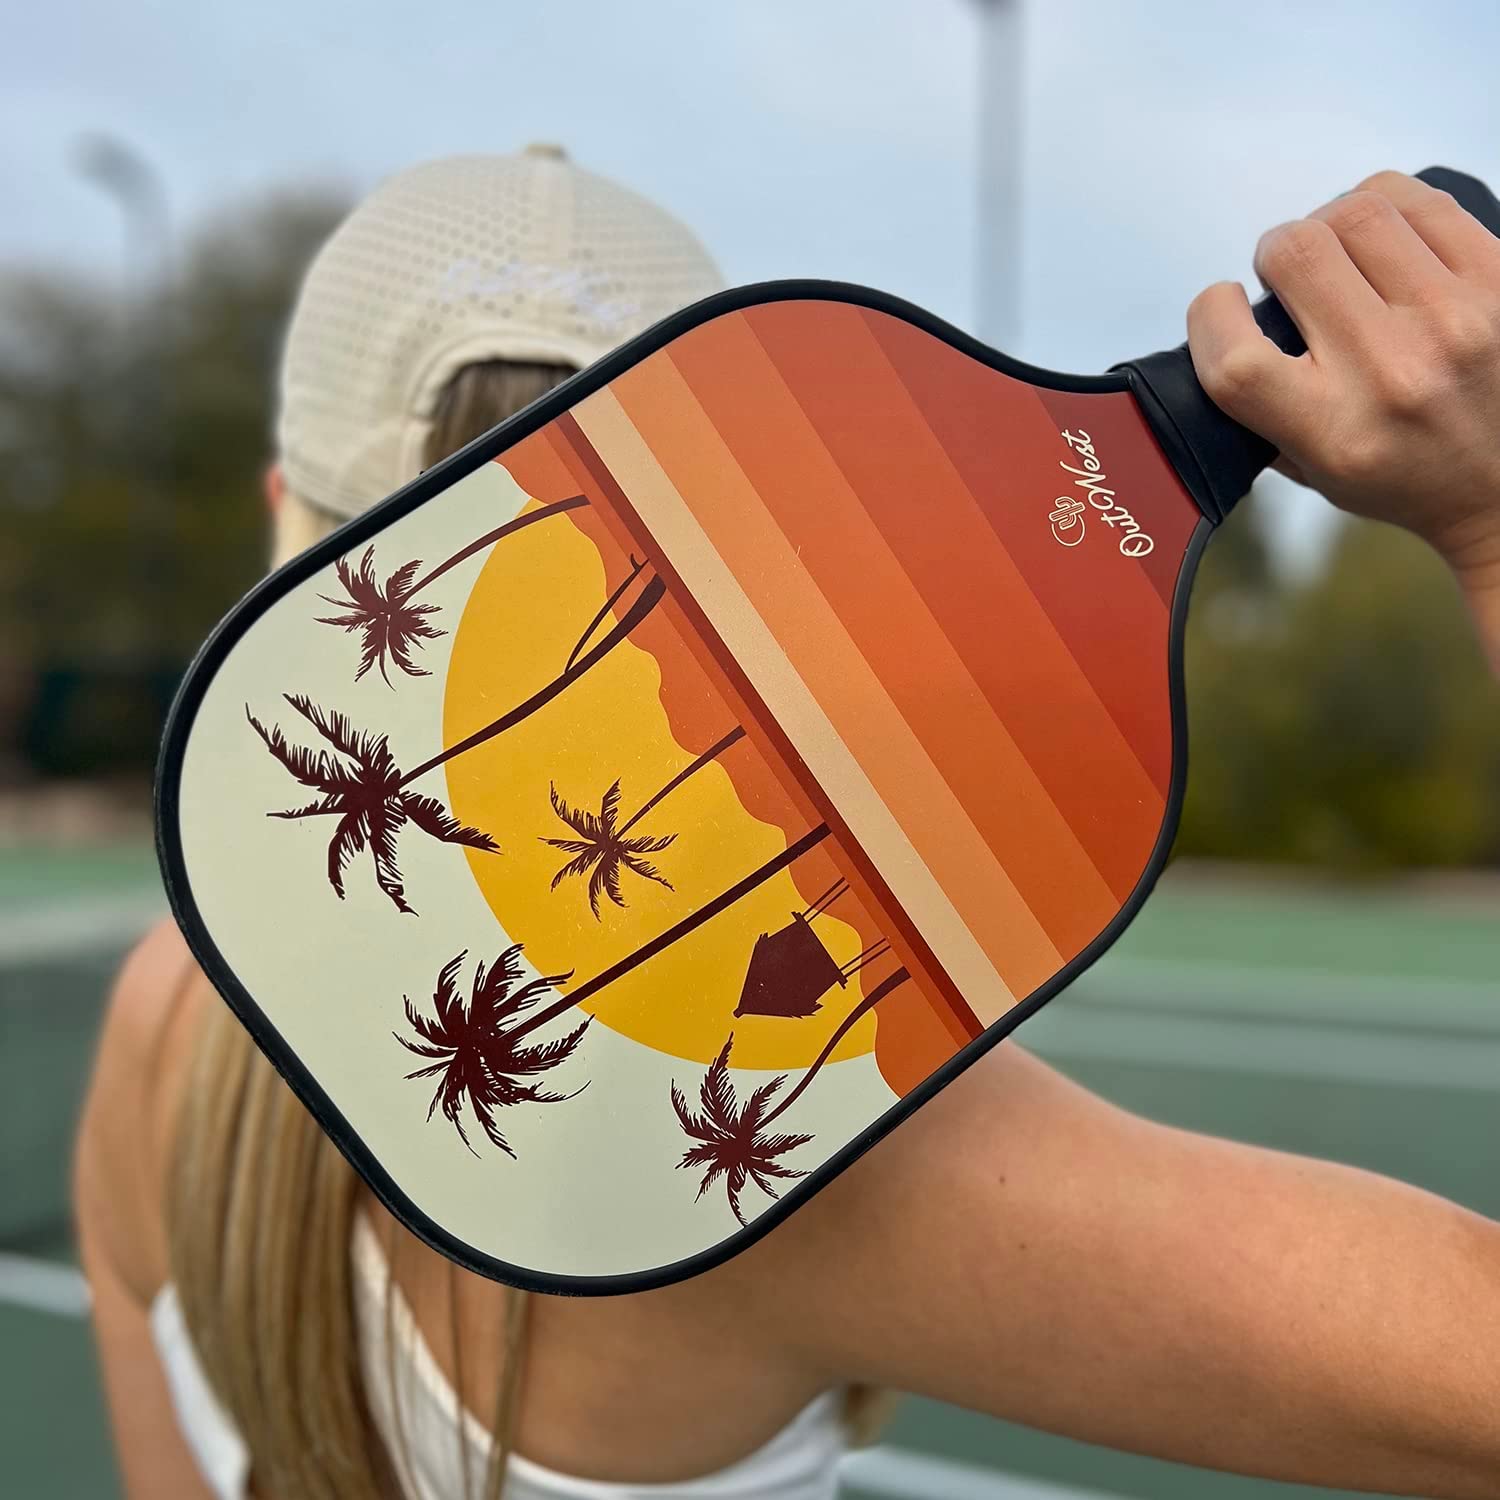 OutWest Sport Pickleball Paddle - Marine Layer, USAPA Approved